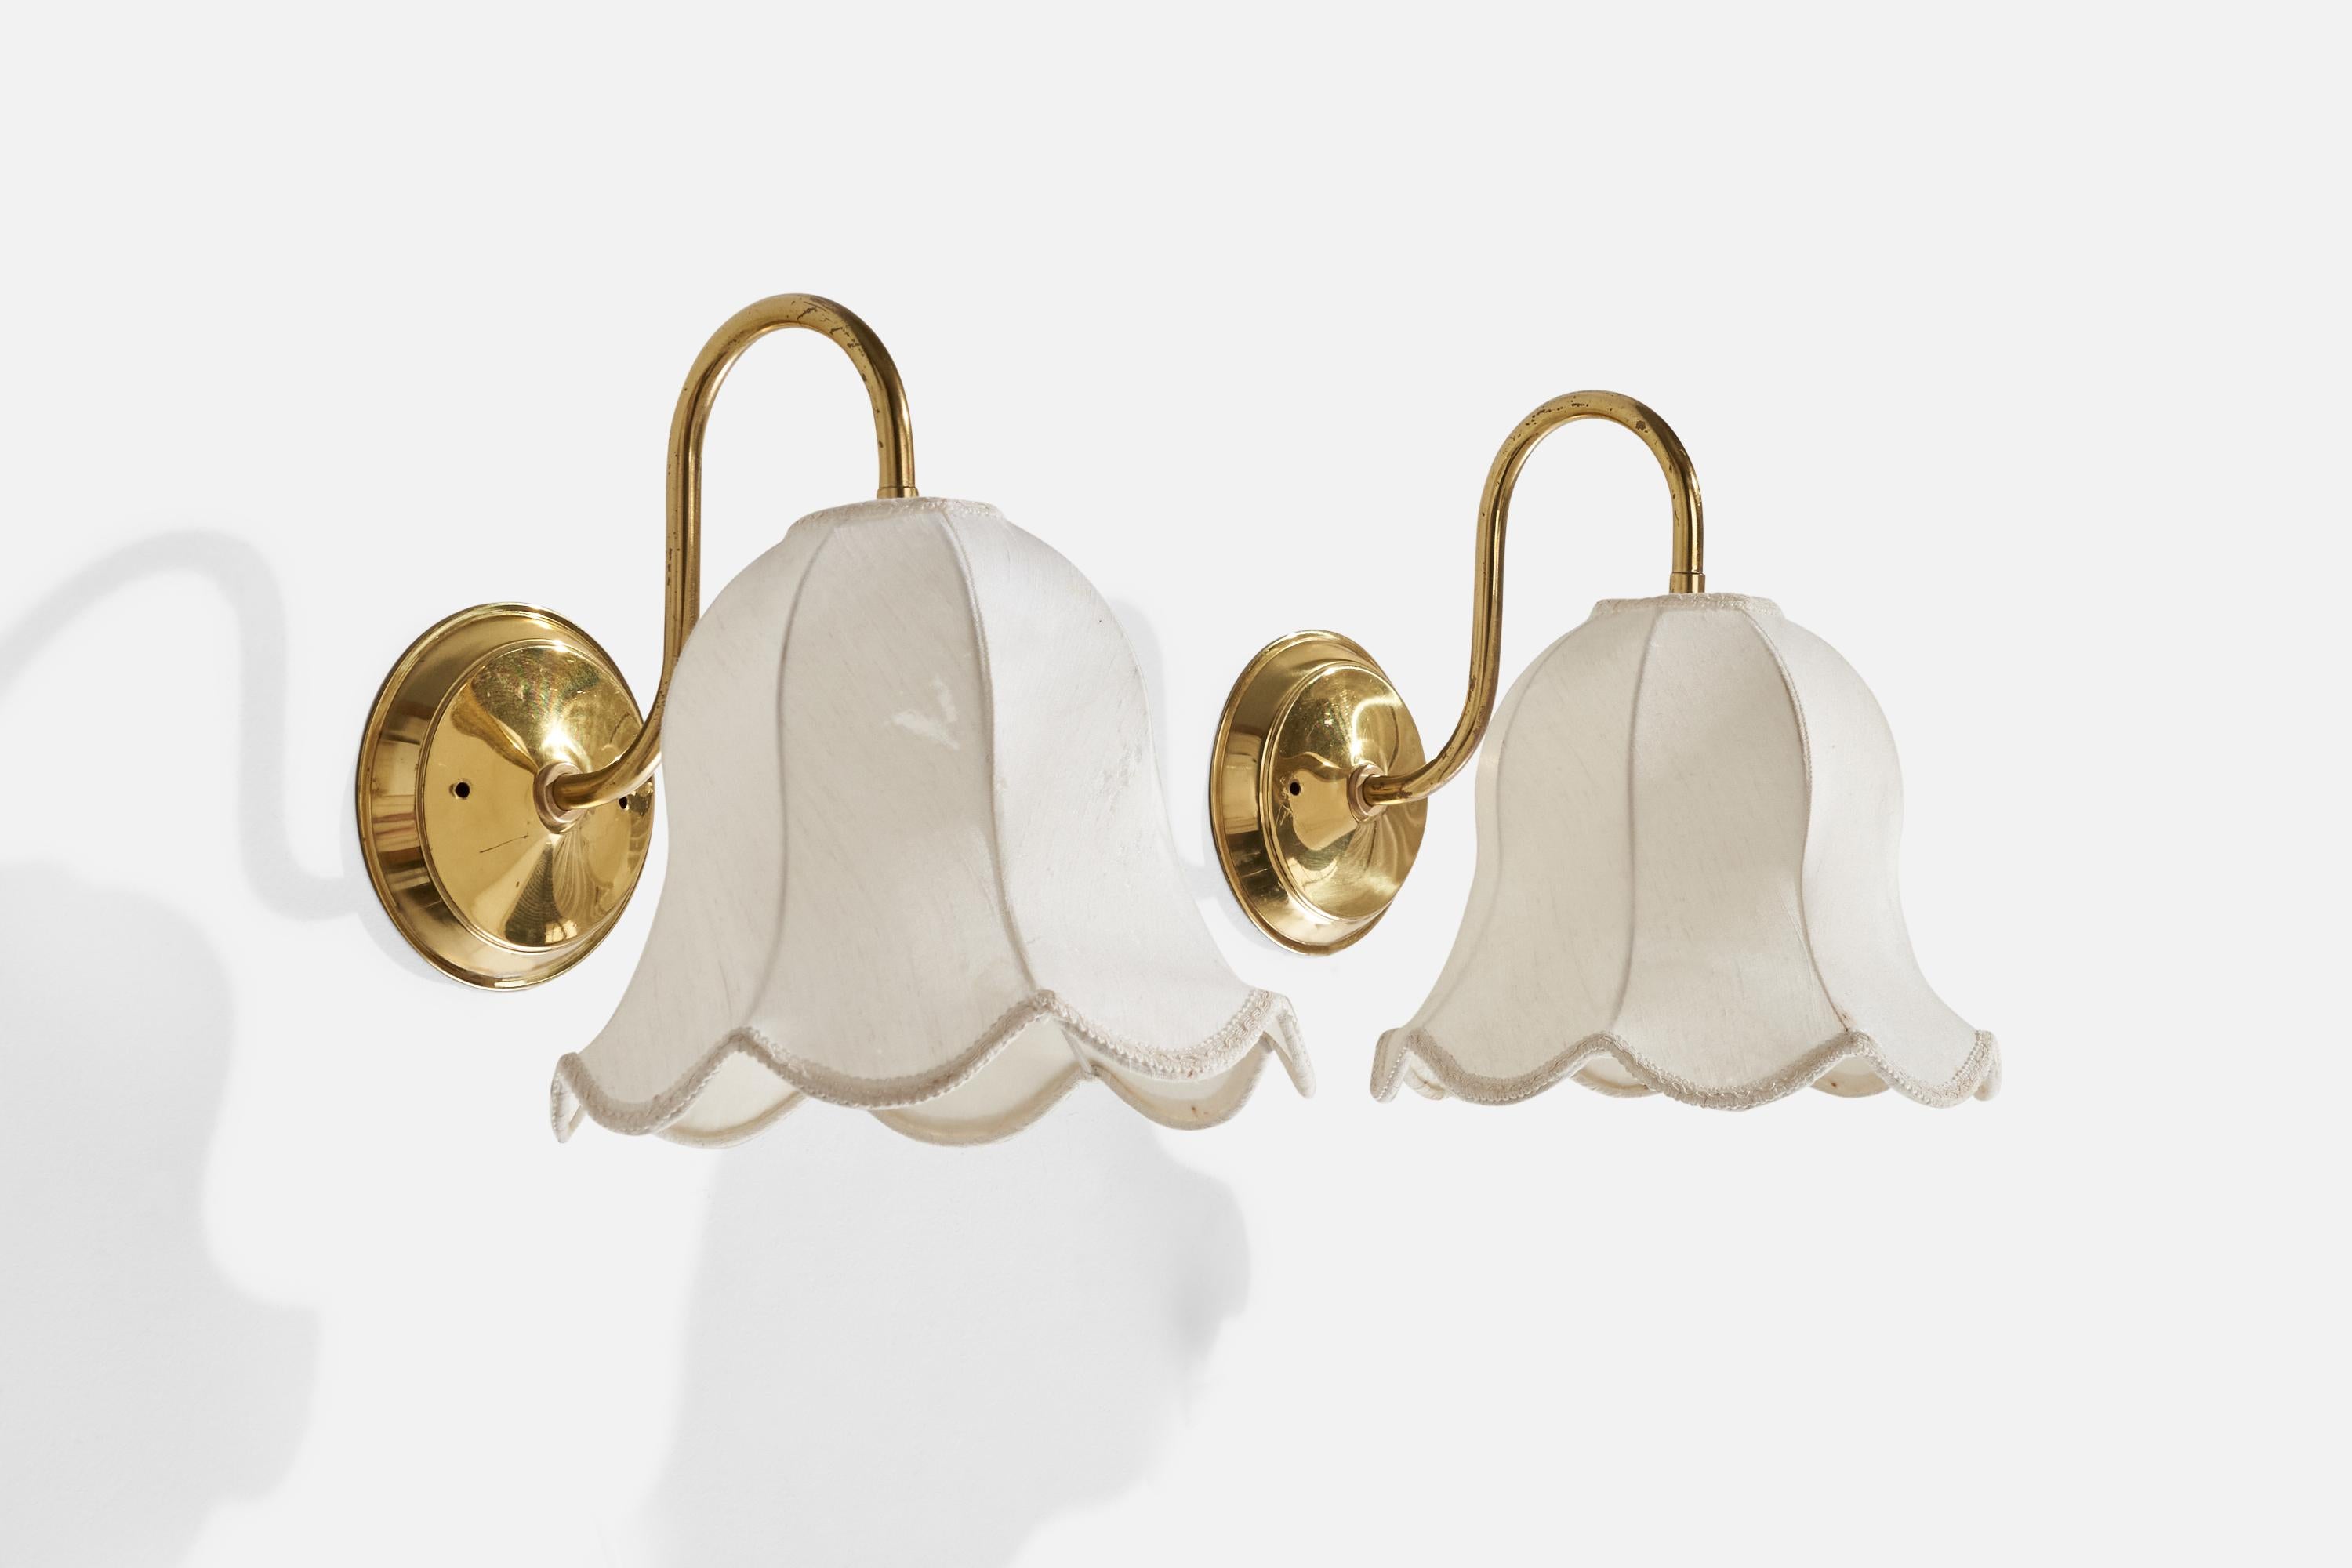 A pair of brass and fabric wall lights designed and produced by Miranda AB, Sweden, c. 1970s.

Overall Dimensions (inches): 12” H x 10” W x 12.25” D
Back Plate Dimensions (inches): 5.50” H x 0.69” D
Bulb Specifications: E-26 Bulb
Number of Sockets: